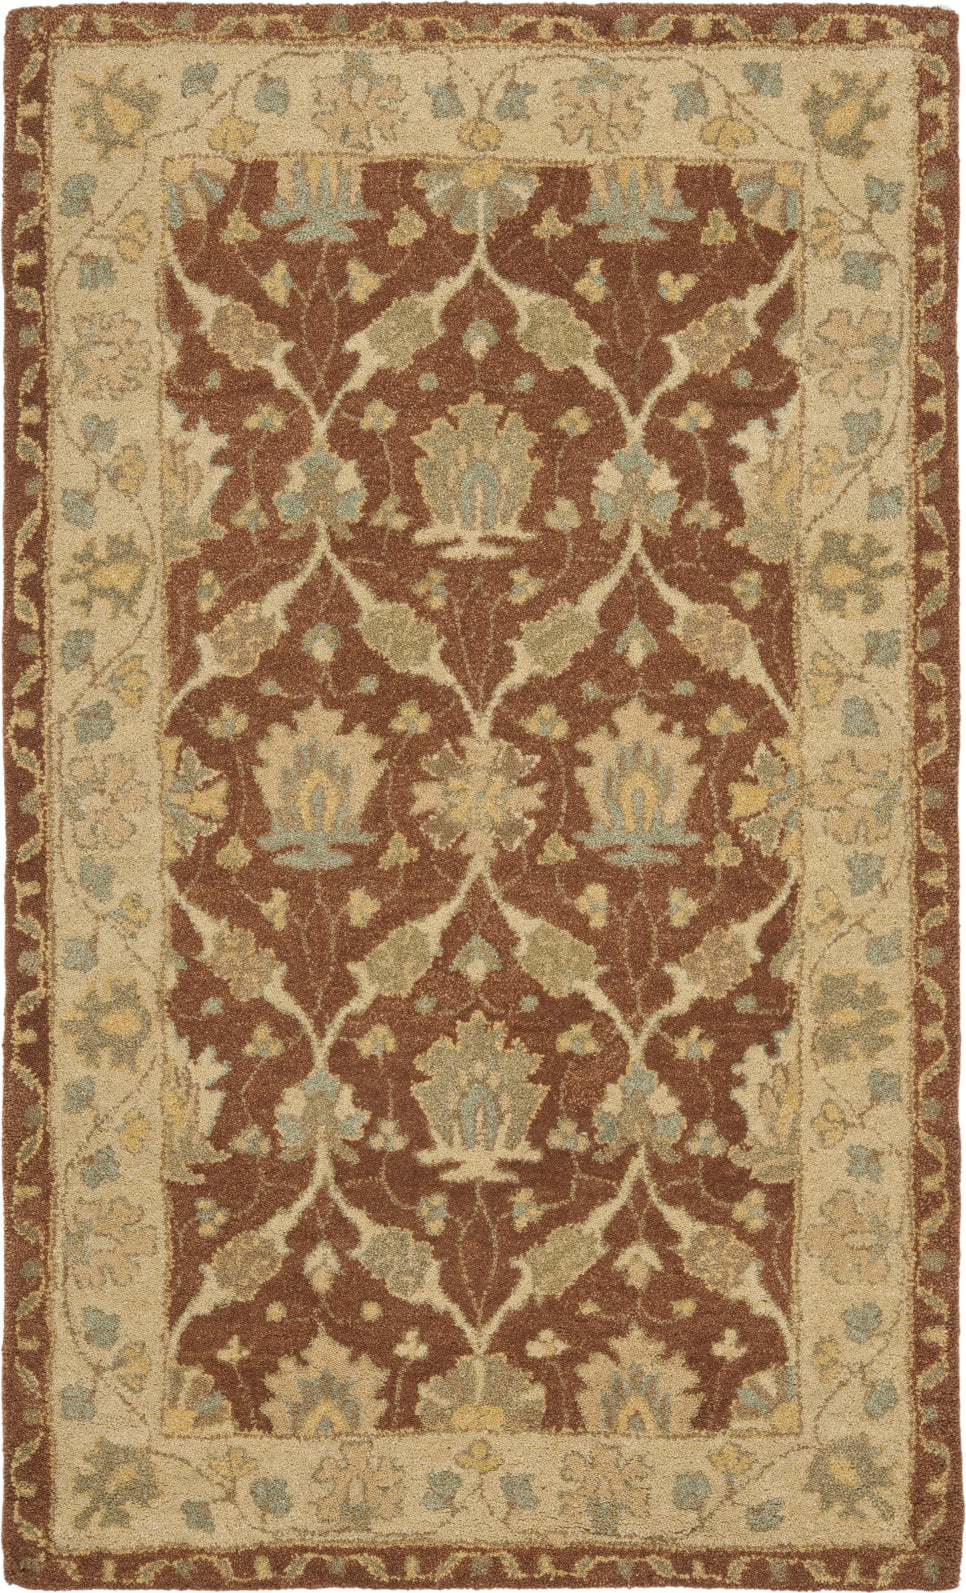 Safavieh Antiquity At315 Brown/Taupe Area Rug main image